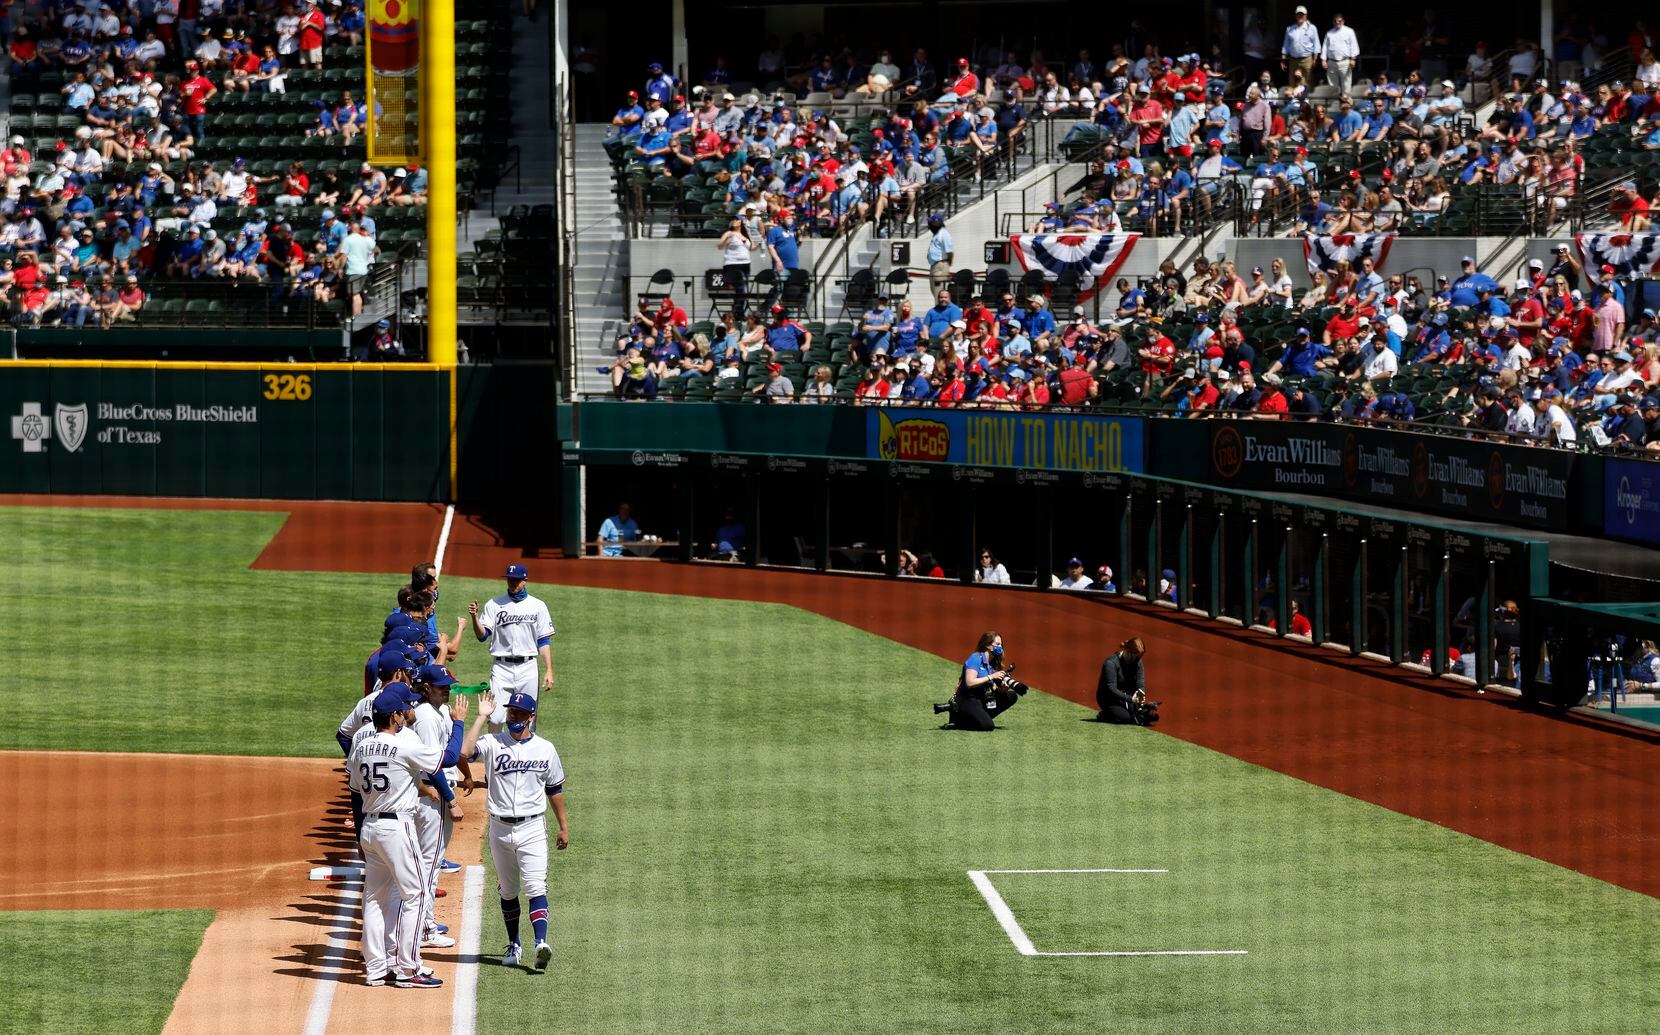 Texas Rangers players and staff are introduced during pregame ceremonies at Globe Life Field in Arlington, Monday, April 5, 2021. The Texas Rangers were facing the Toronto Blue Jays in their home opener. (Tom Fox/The Dallas Morning News)